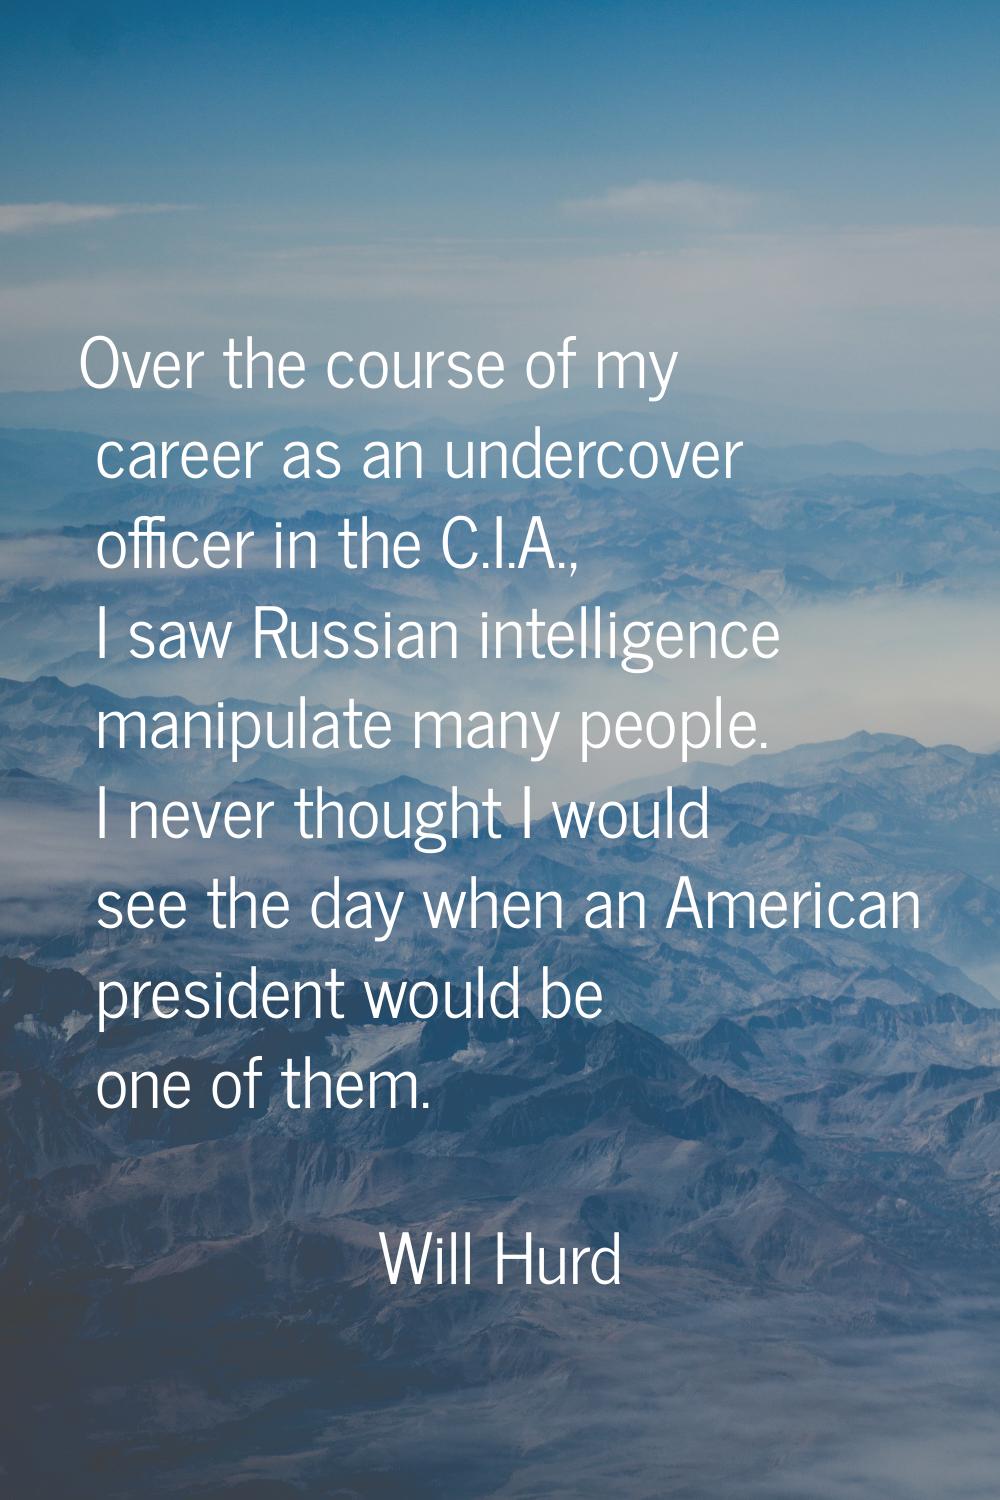 Over the course of my career as an undercover officer in the C.I.A., I saw Russian intelligence man